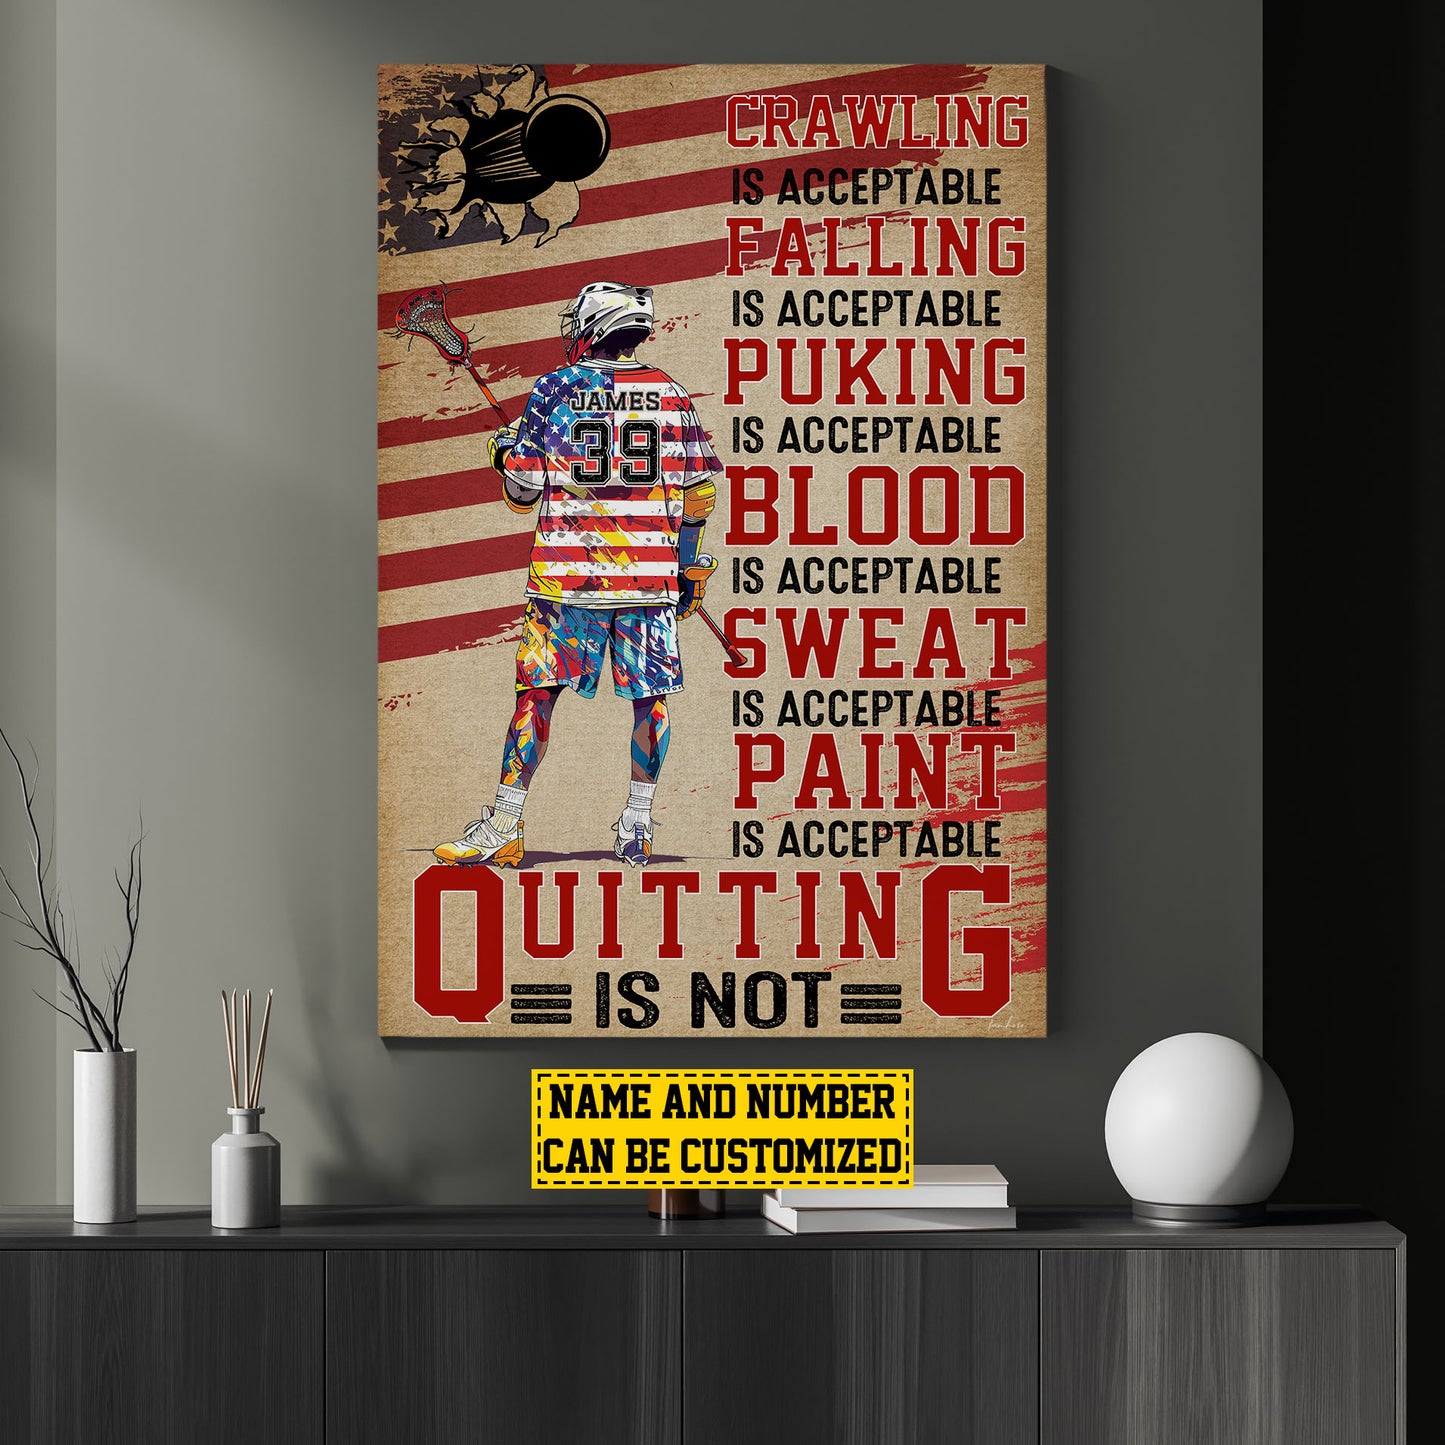 Quitting Is Not, Personalized Lacrosse Boy Canvas Painting, Inspirational Quotes Wall Art Decor, Poster Gift For Lacrosse Lovers, Lacrosse Boy Players